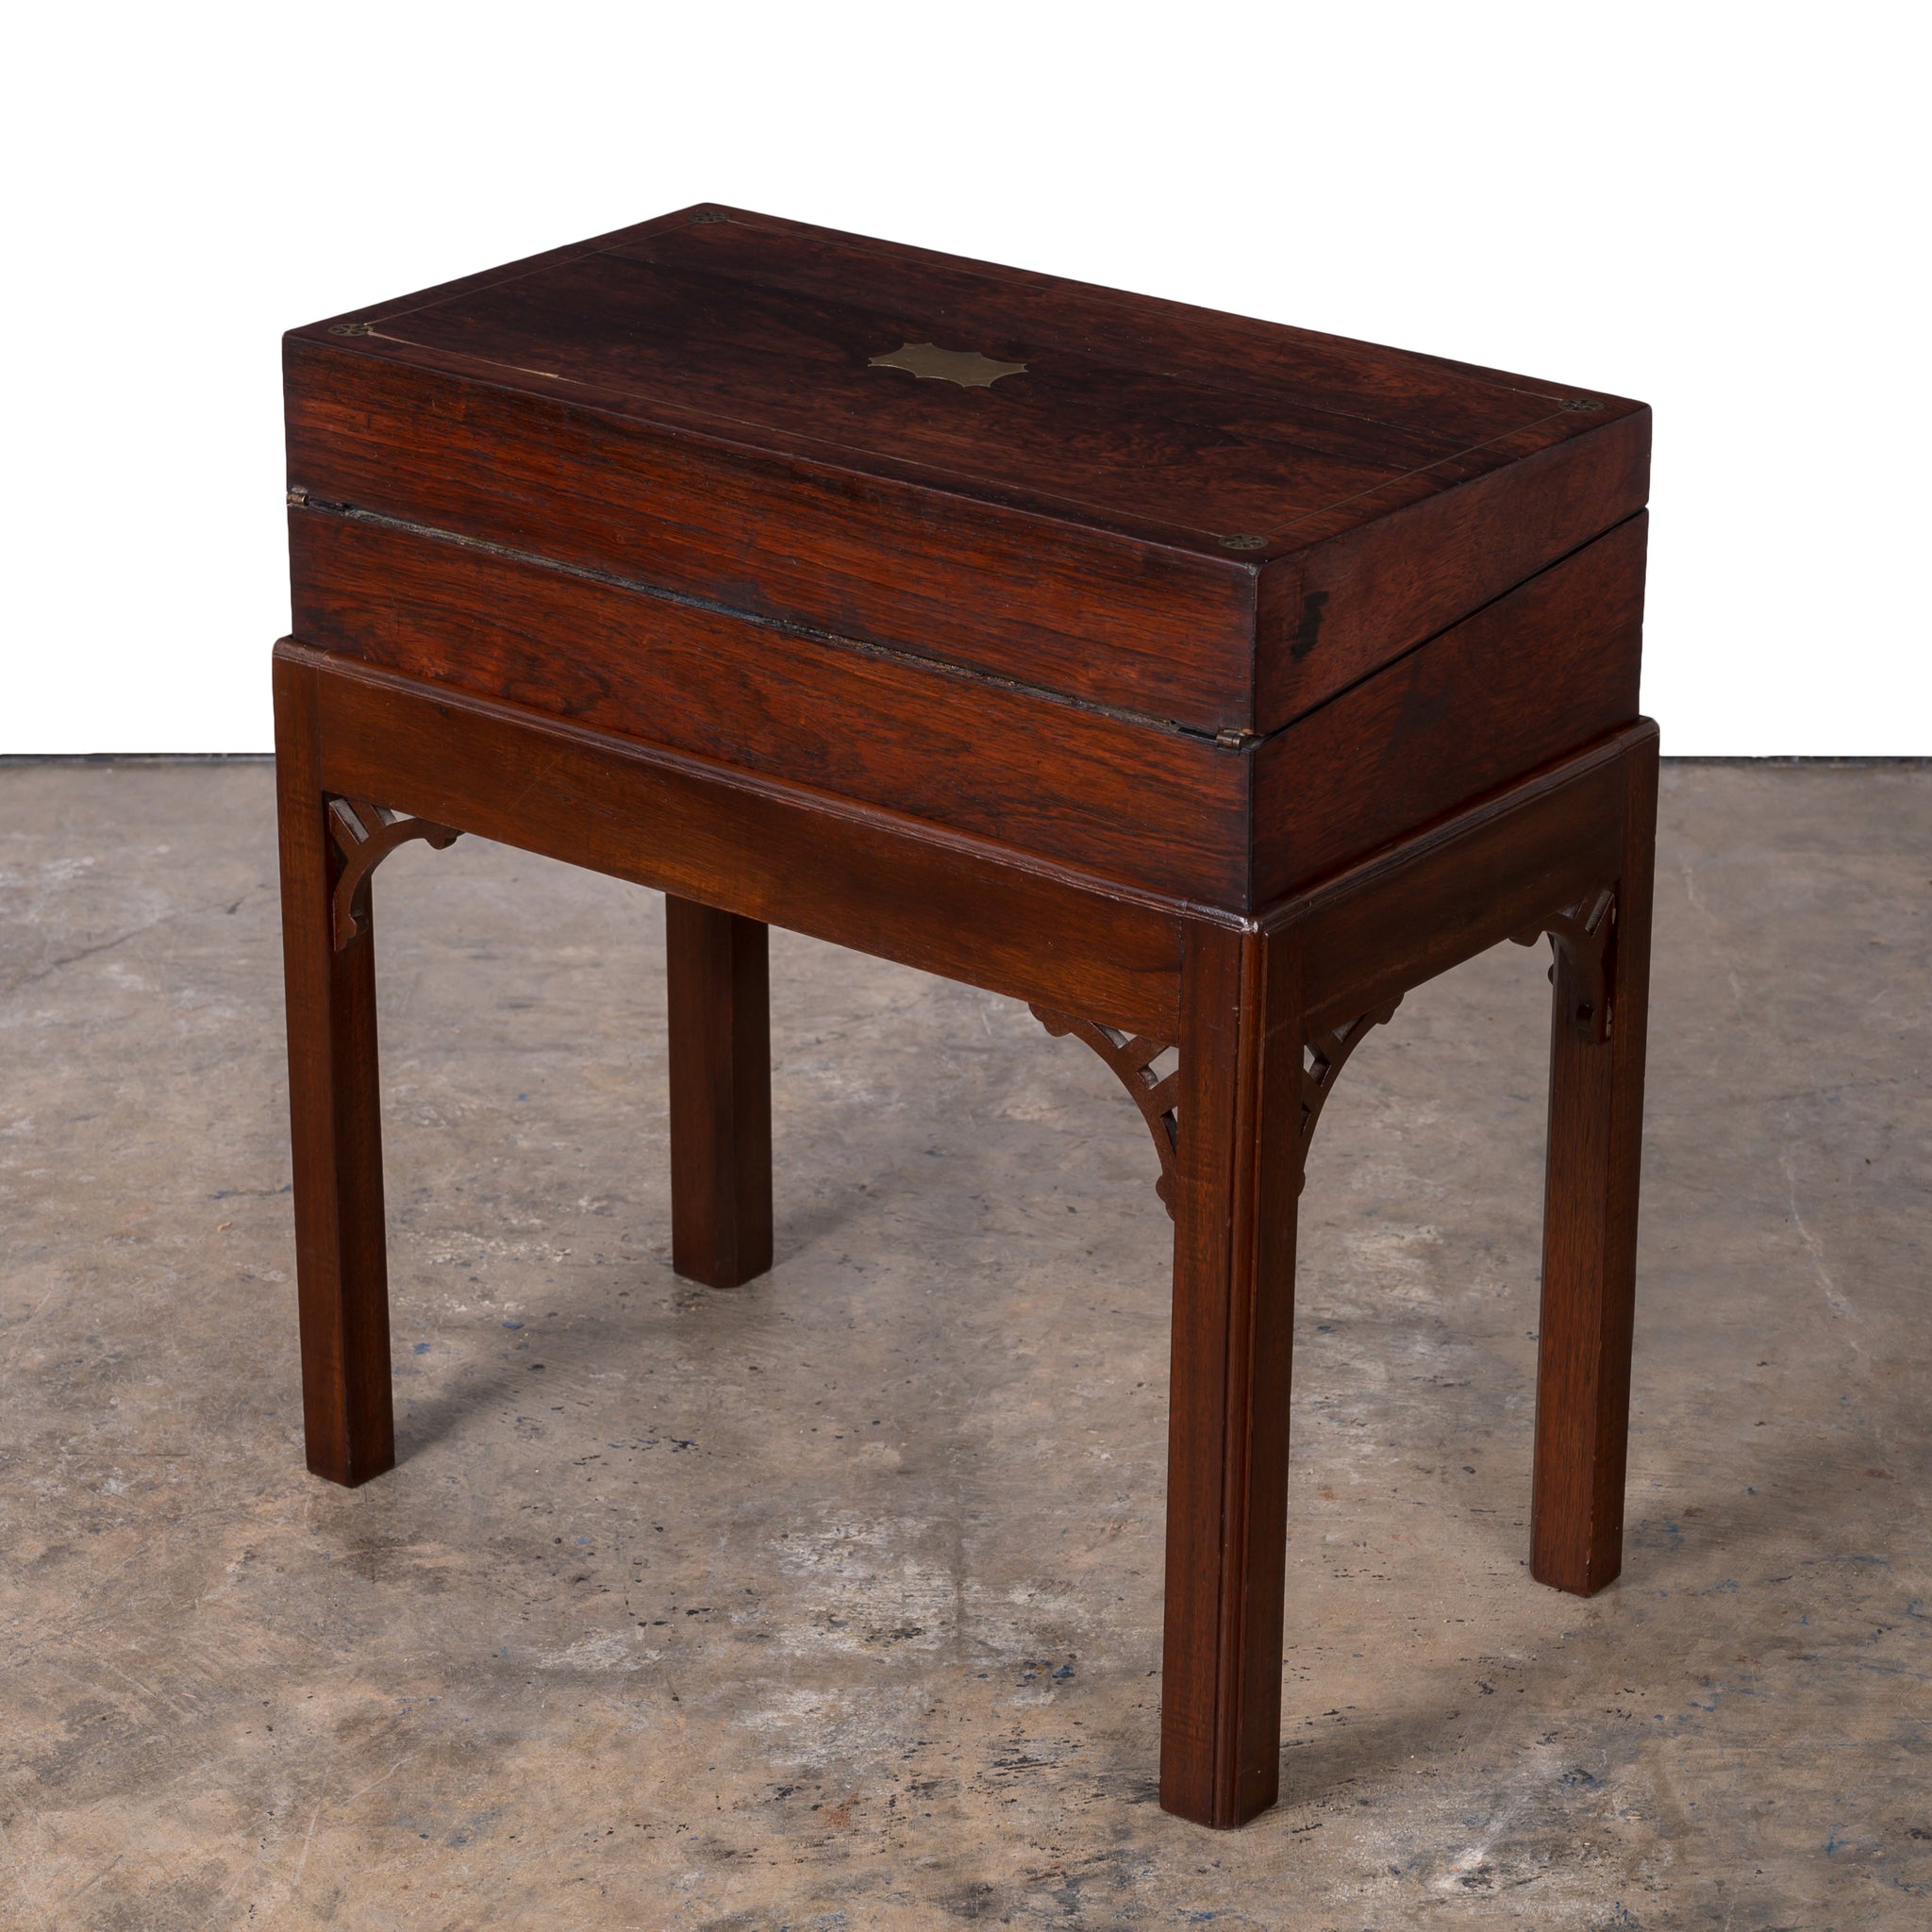 English Rosewood Lap Desk on Stand, 19th Century